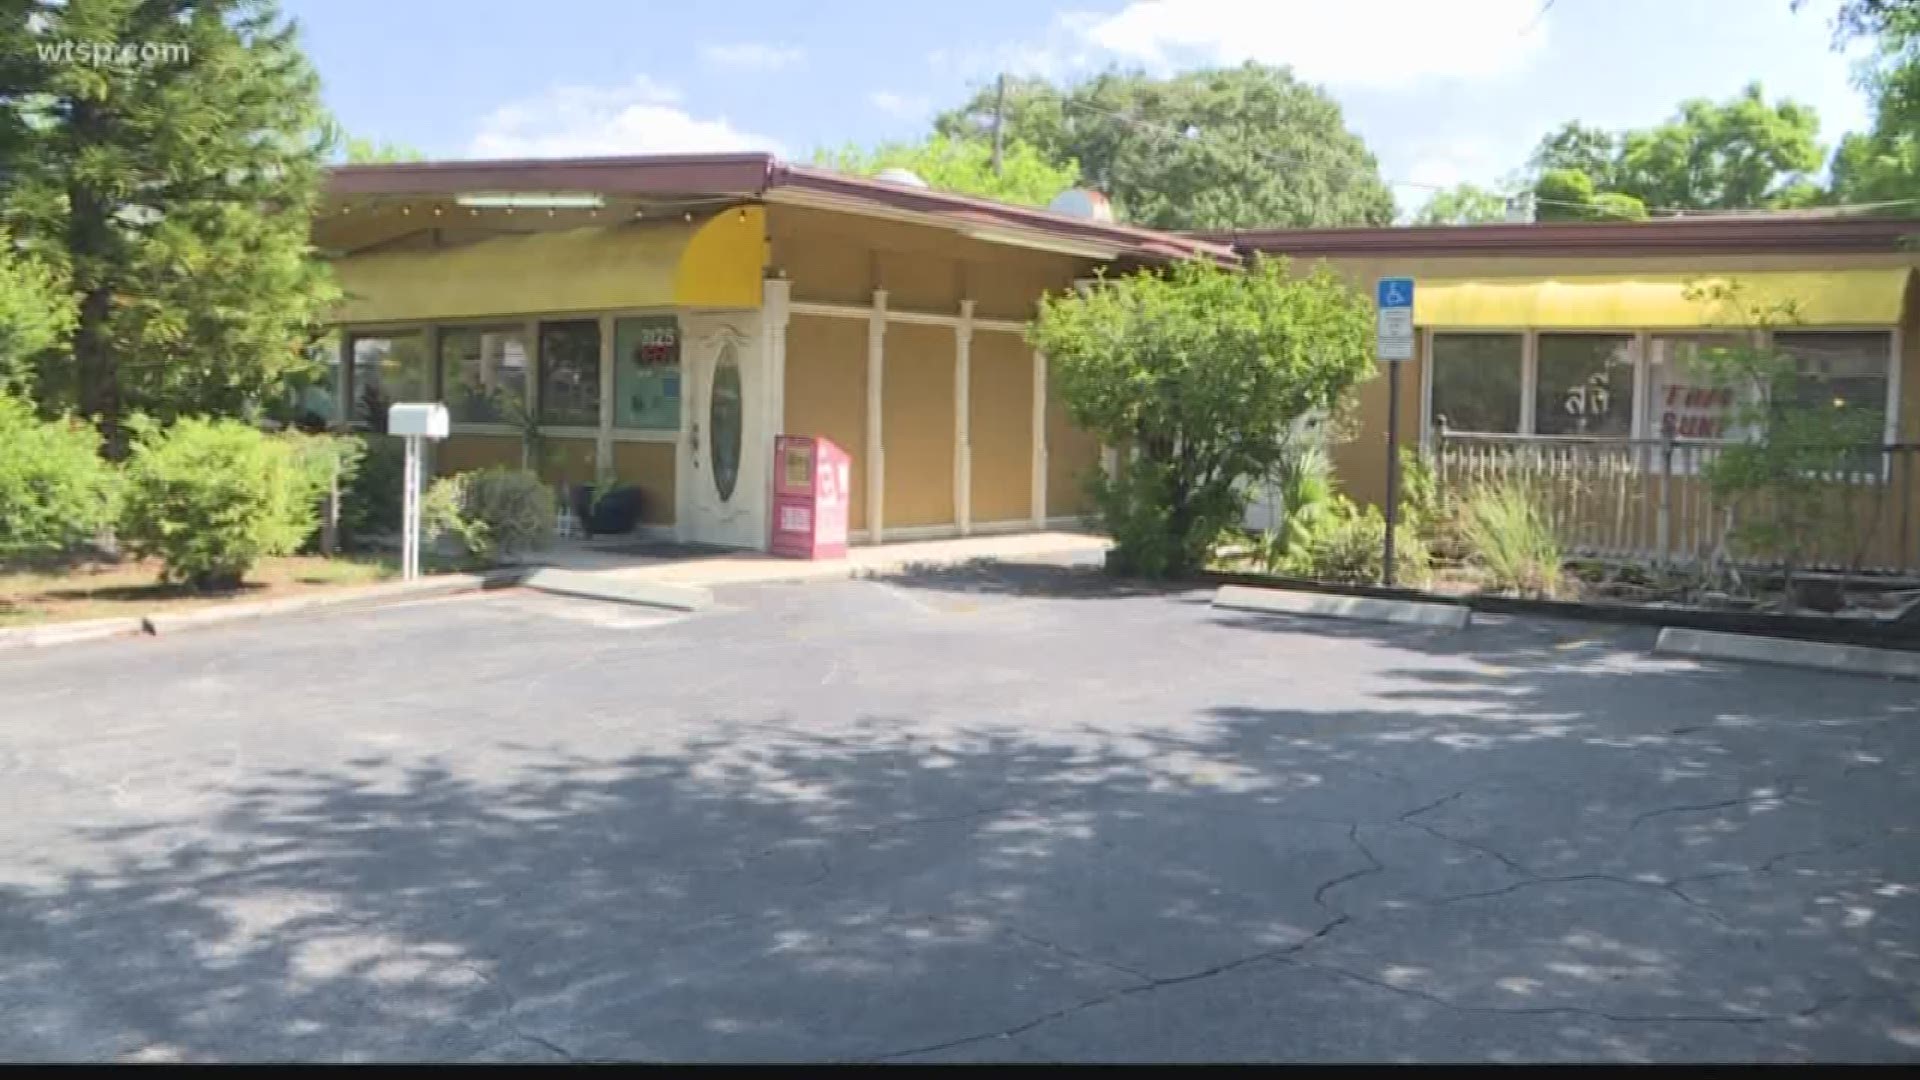 St. Pete's Siam Garden Restaurant was shut down after inspectors found evidence of rodents defecating in the food. https://on.wtsp.com/2mc3KmT